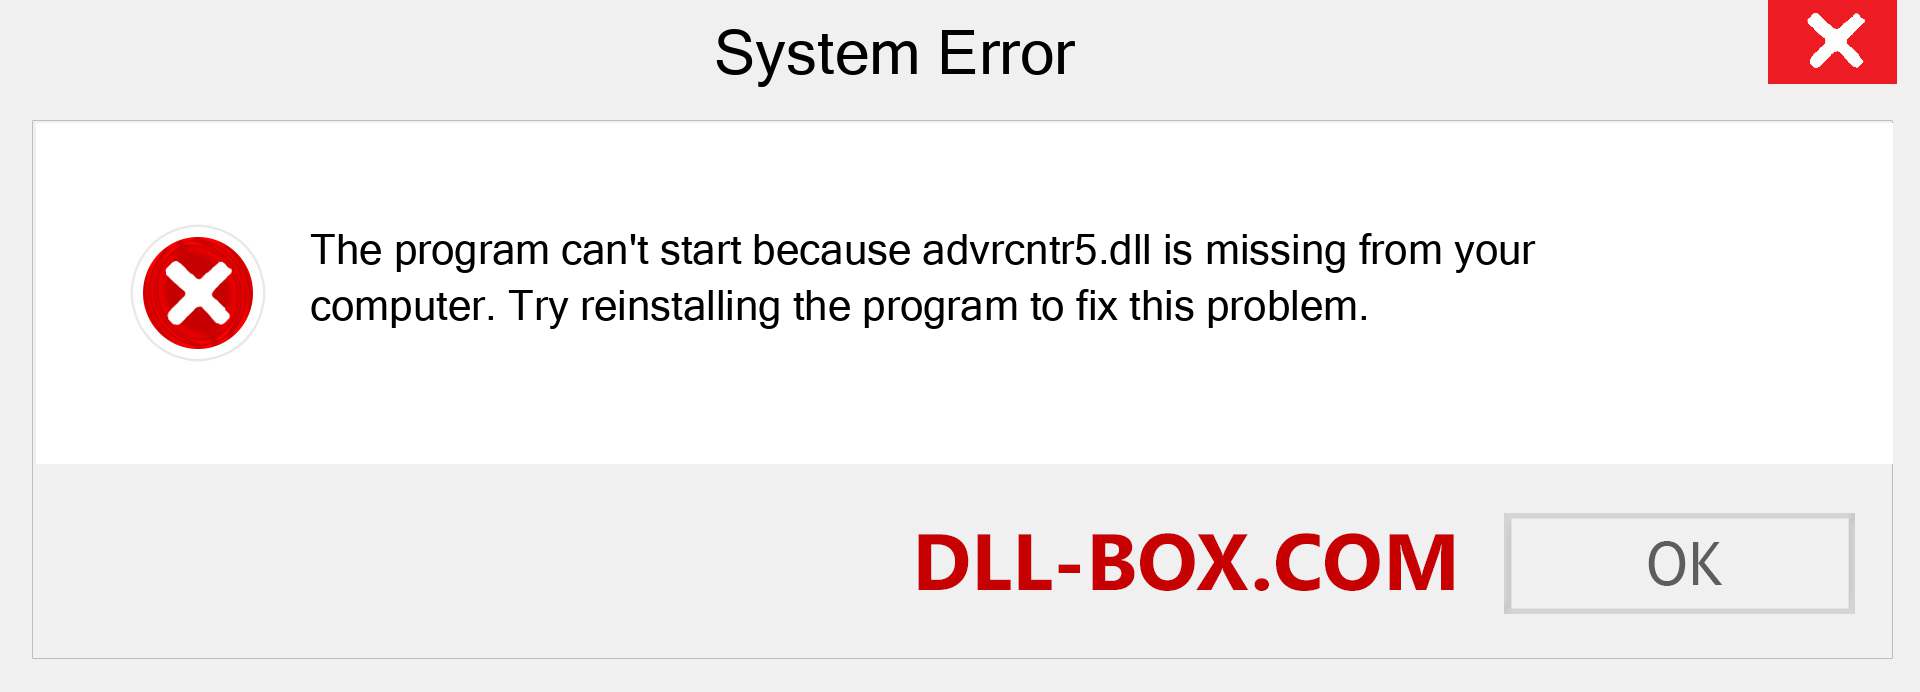  advrcntr5.dll file is missing?. Download for Windows 7, 8, 10 - Fix  advrcntr5 dll Missing Error on Windows, photos, images